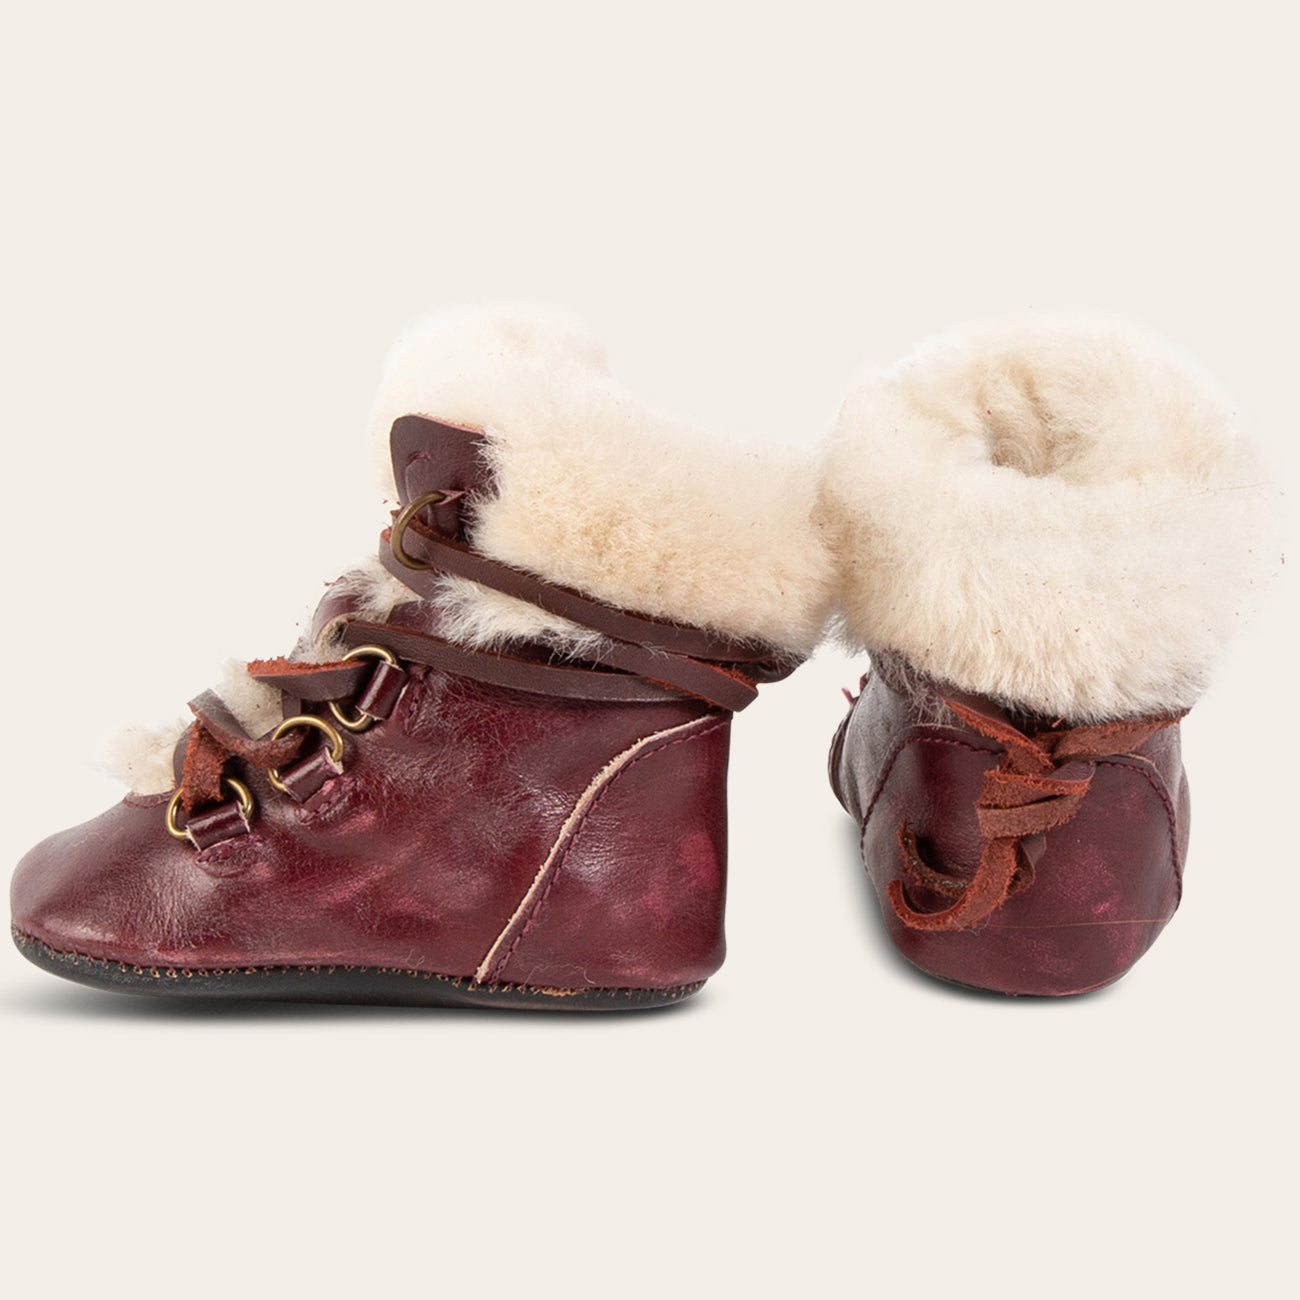 front and side view showing shearling lining and contrasting leather lace detailing on FREEBIRD infant baby Norway wine leather bootie